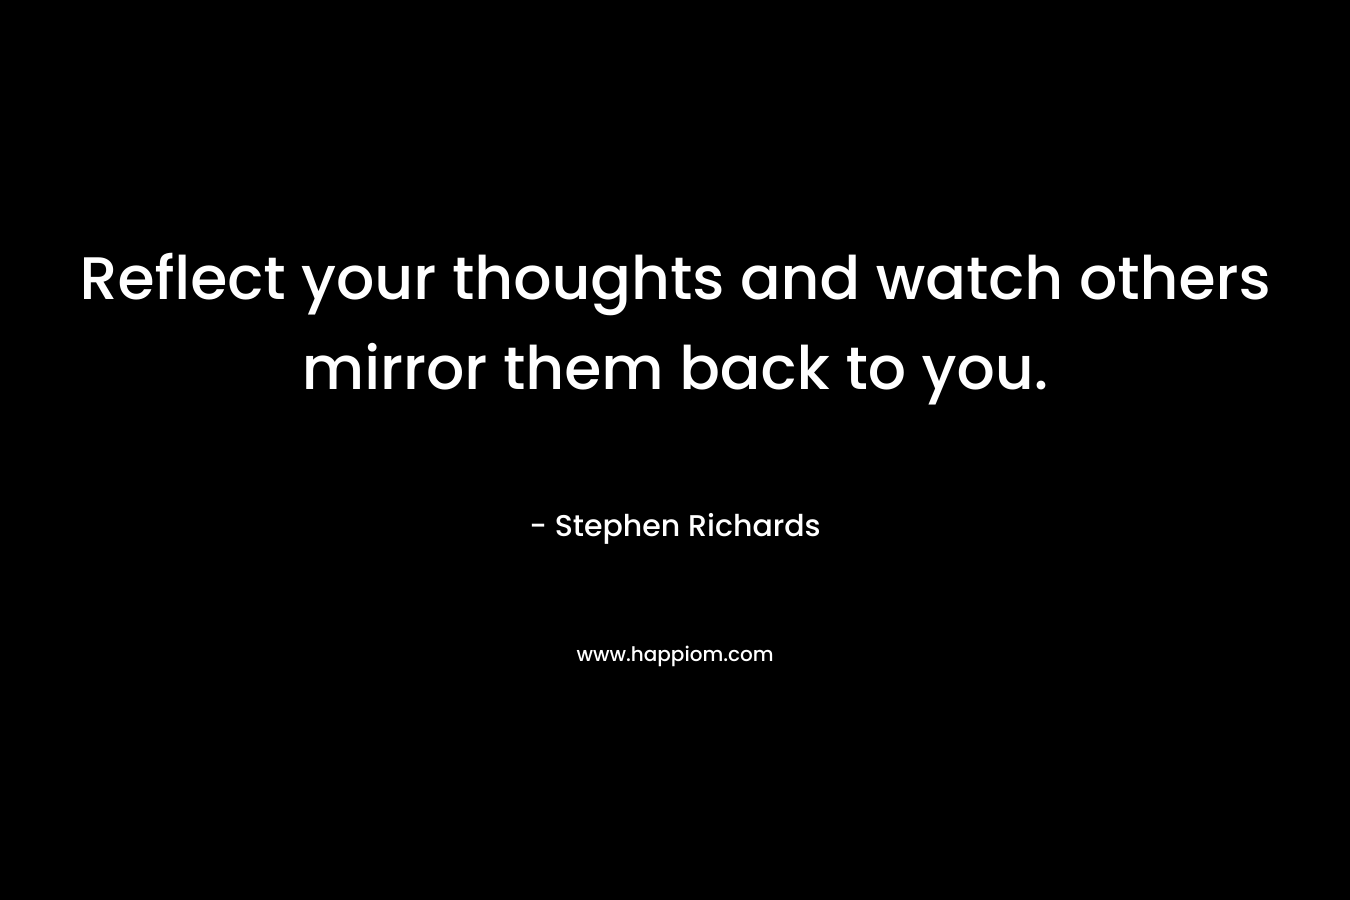 Reflect your thoughts and watch others mirror them back to you.